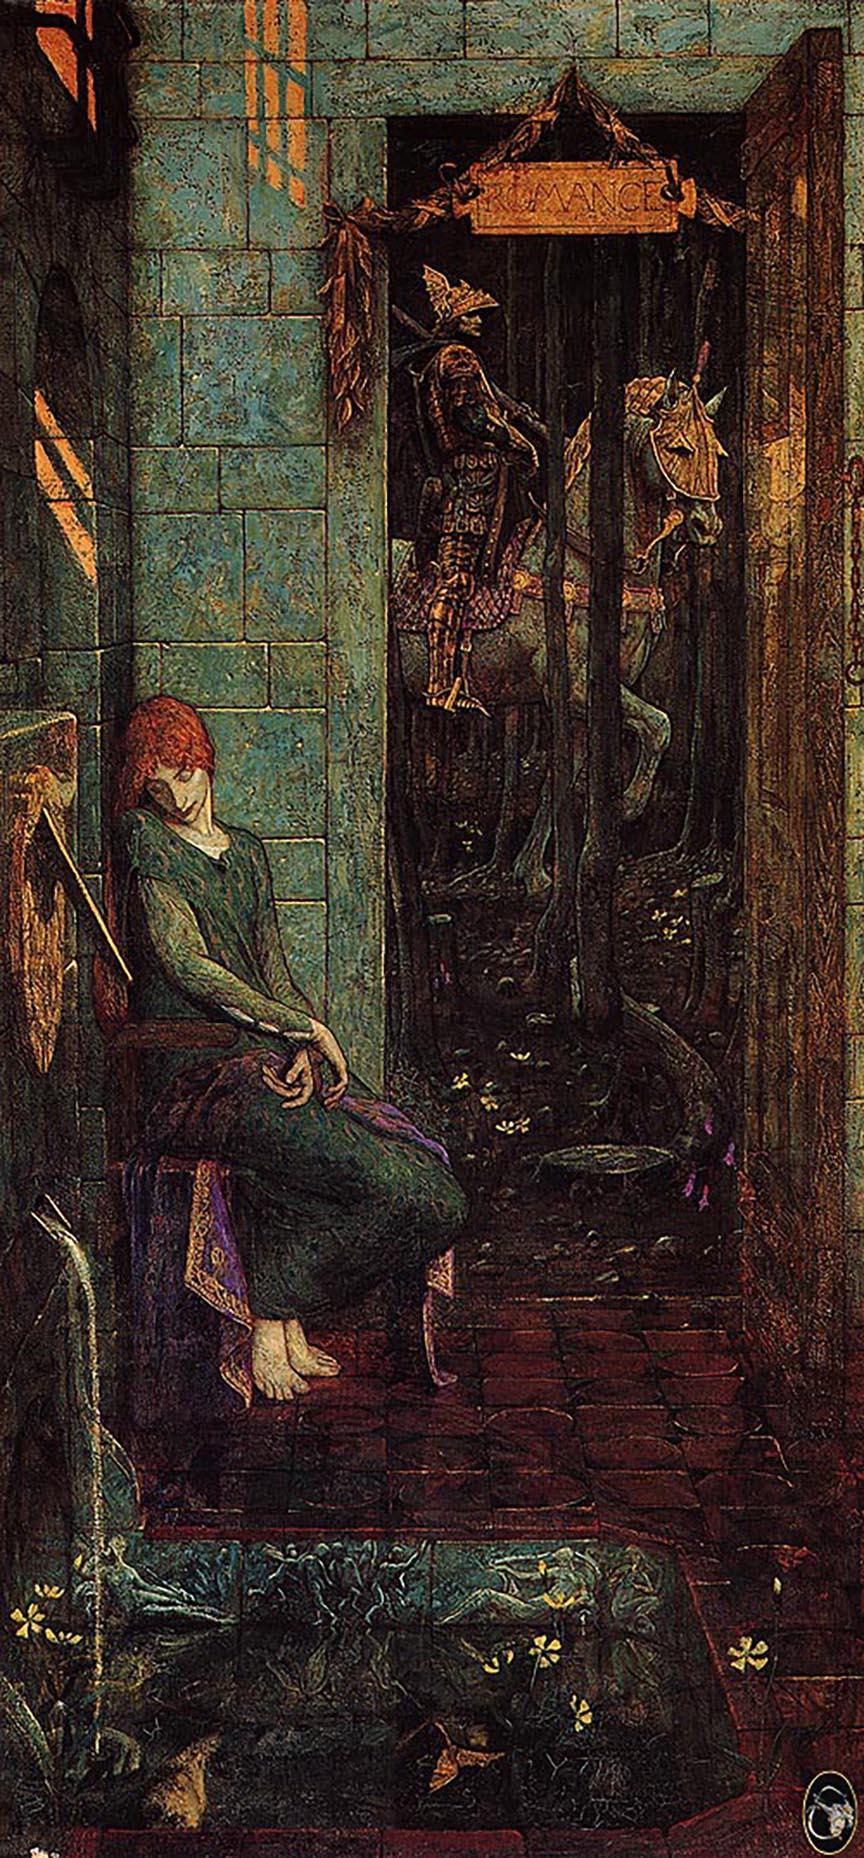 Yvain departing from Laudine, 19th century, by Edward Burne-Jones. Oil on canvas. (Public Domain)